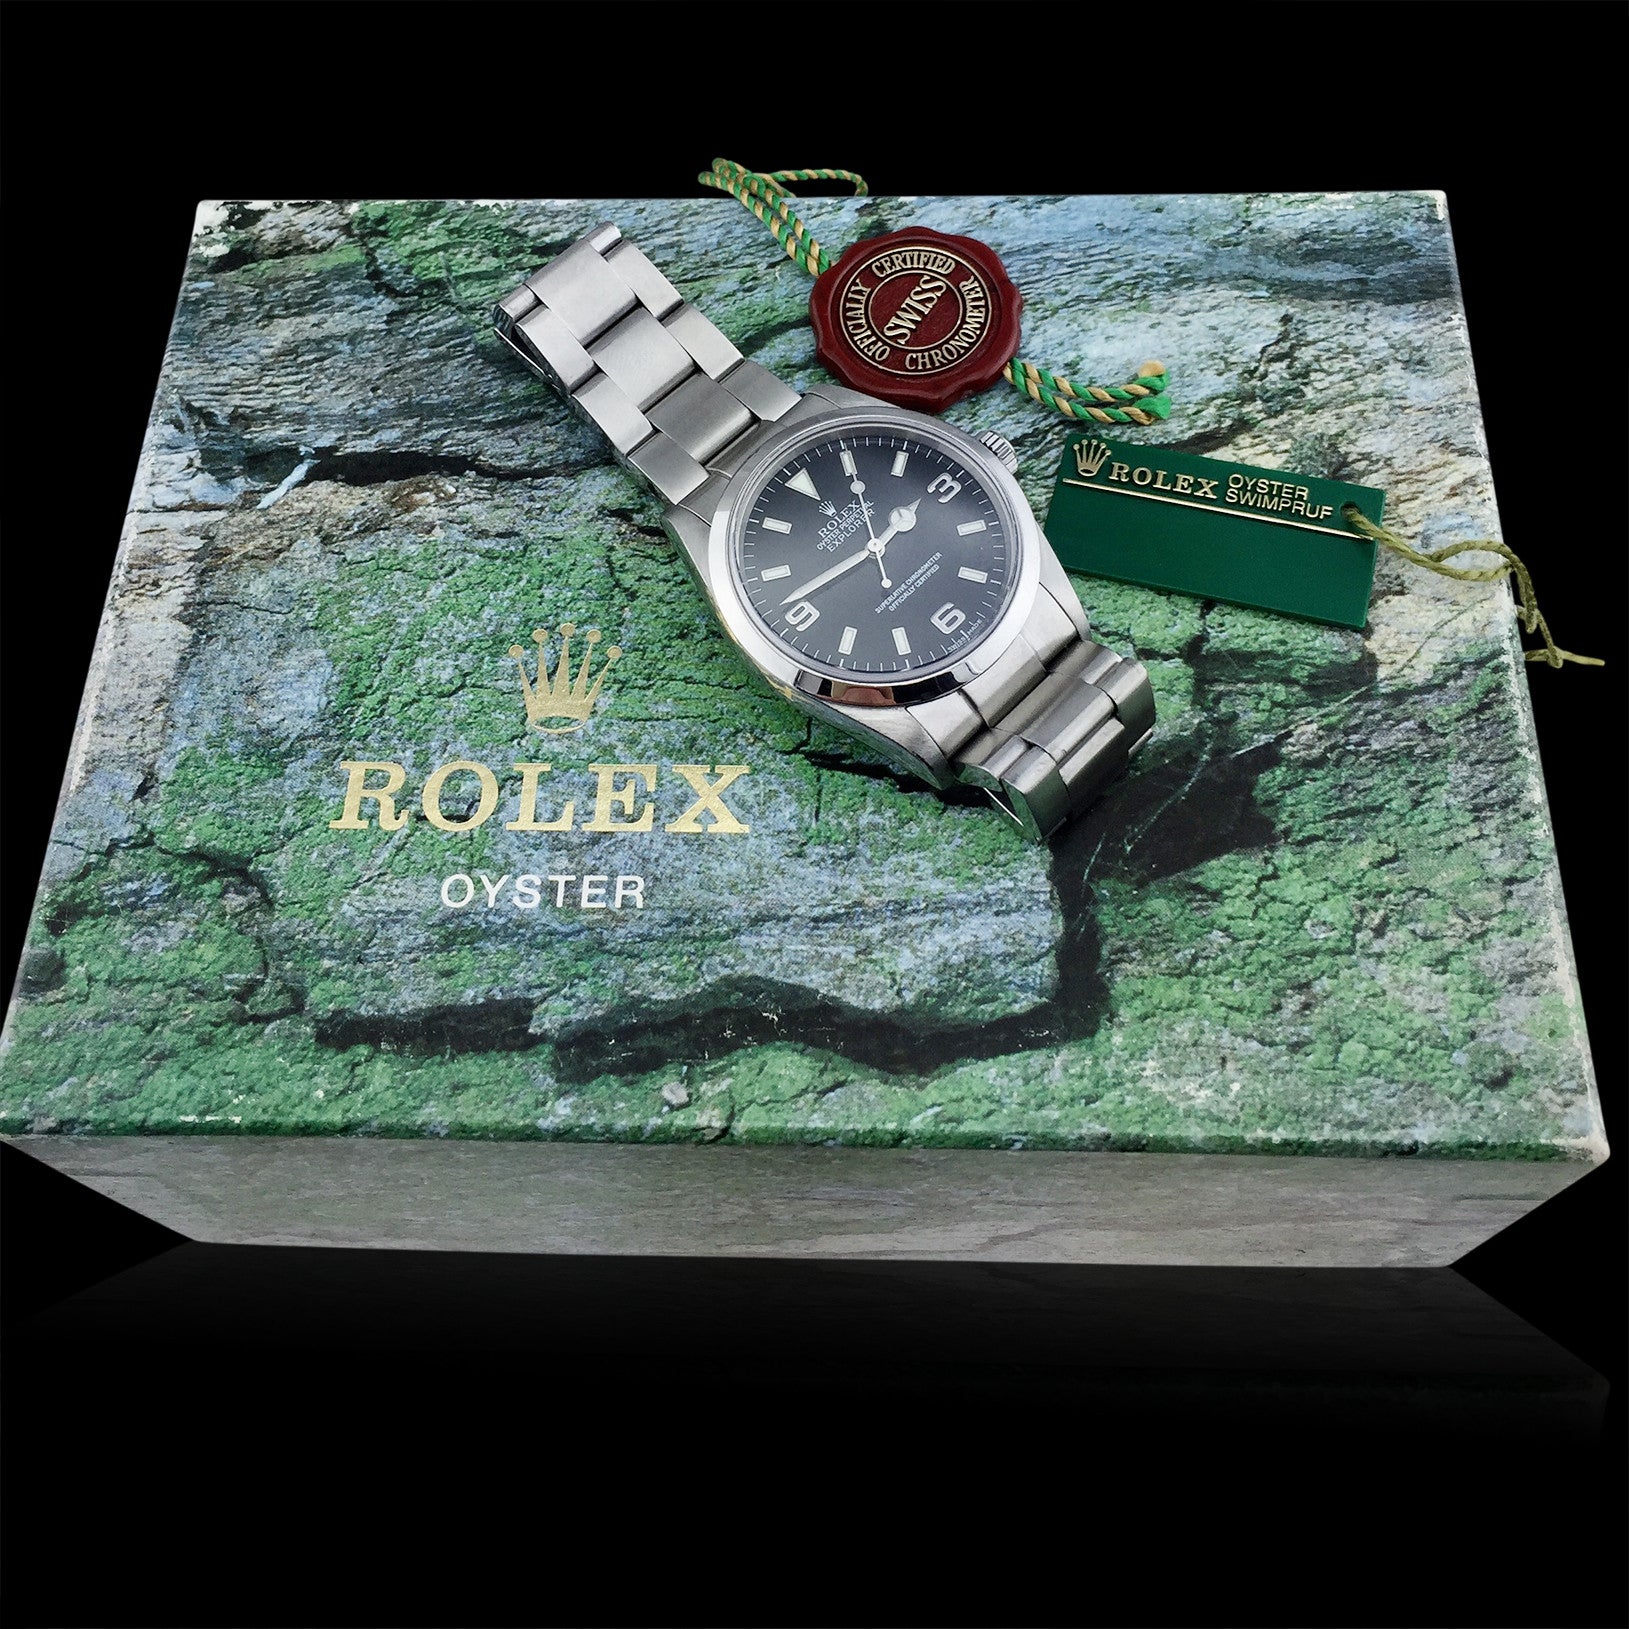 Stainless Steel Rolex Explorer with Original Box & Papers - 66mint